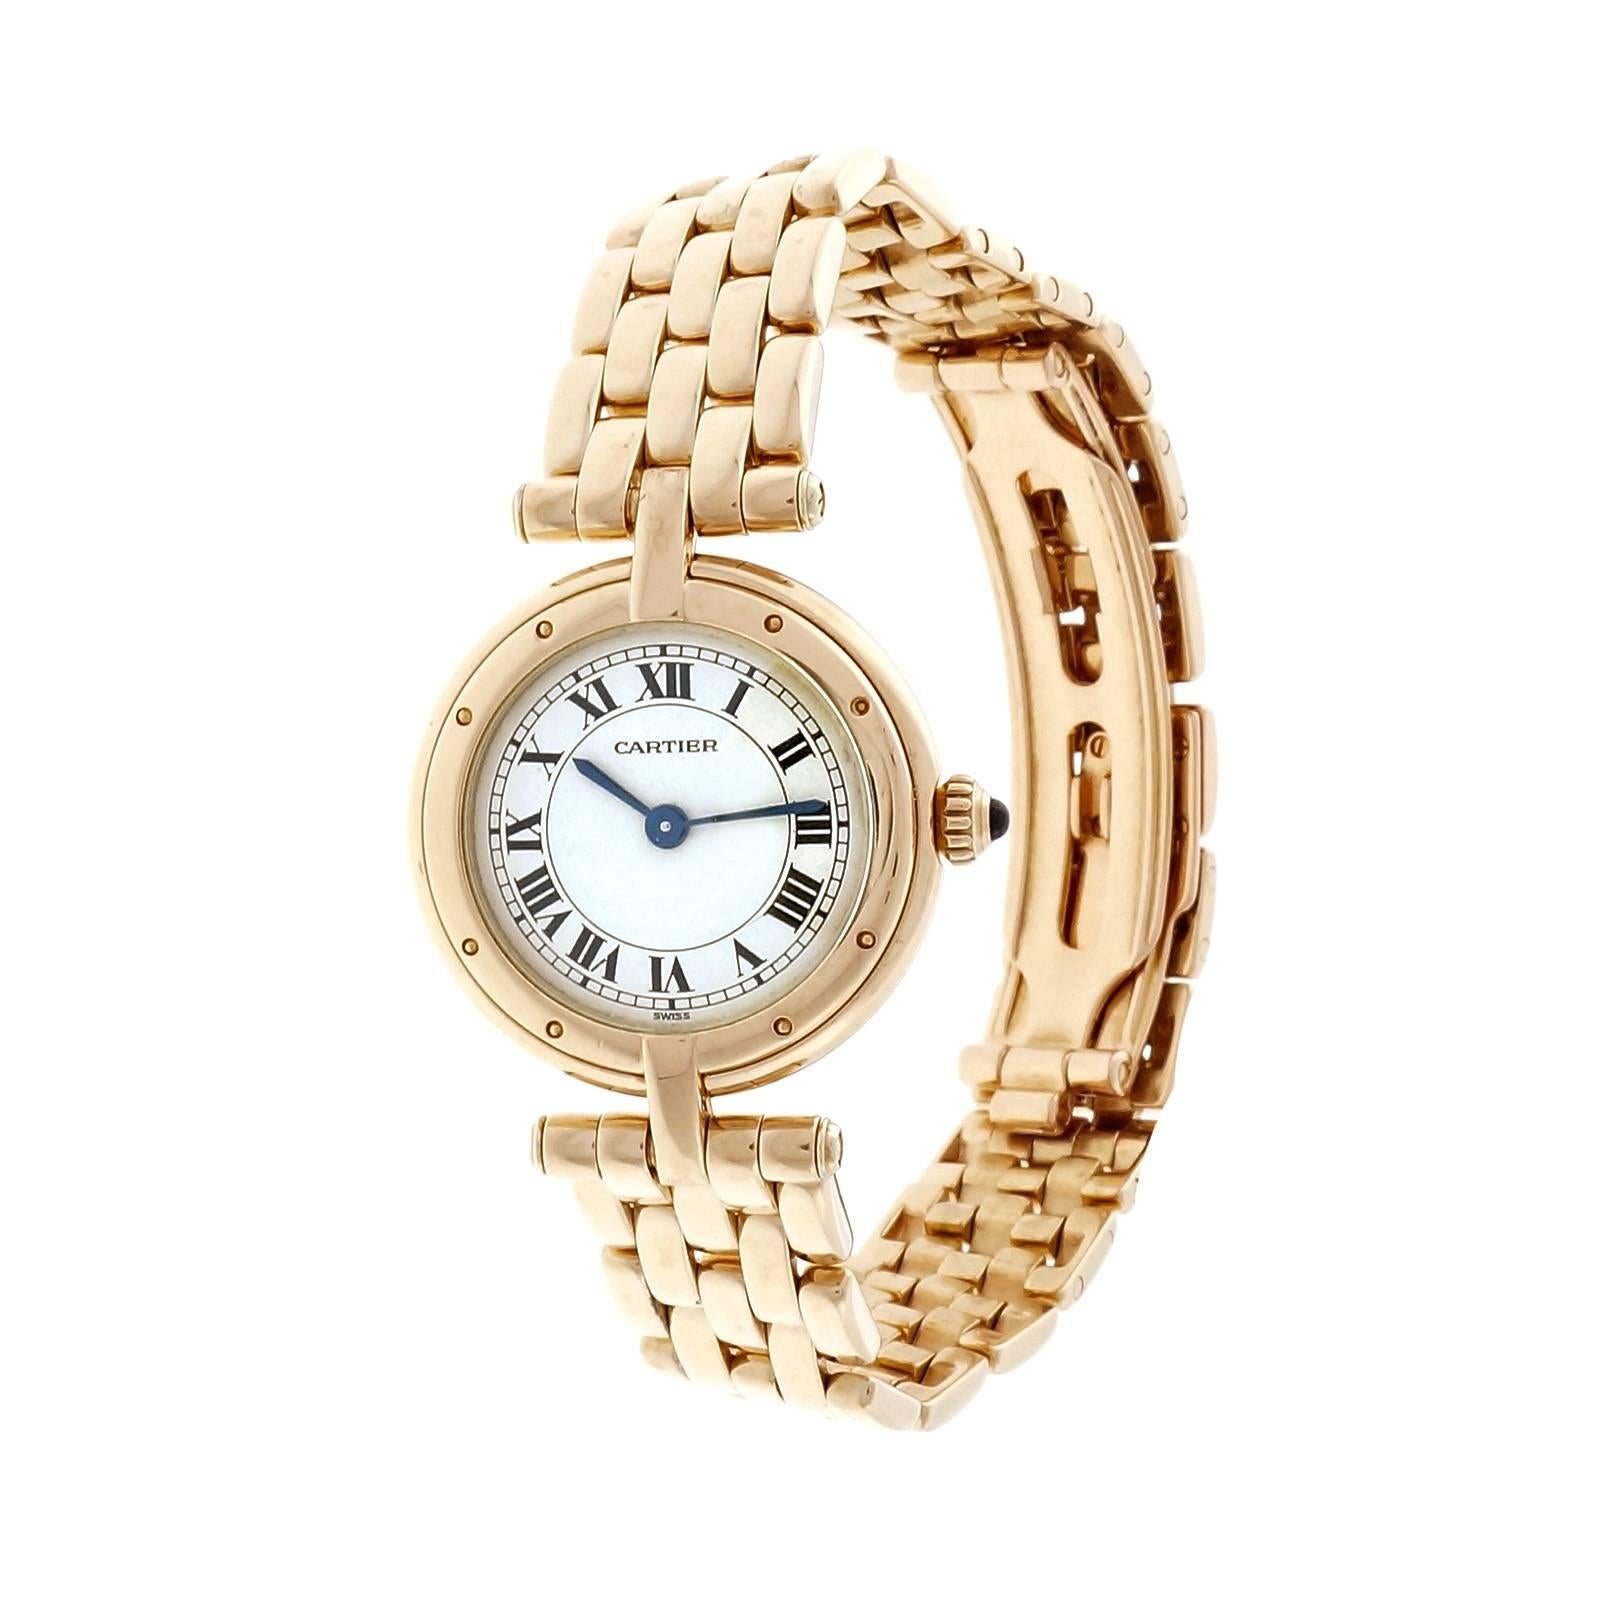 Cartier Panther five row solid 18k yellow gold round Quartz watch. 

18k yellow gold
Length: 31mm
Width: 23.33mm
Band width at case: 12mm
Case thickness: 5.56mm
Band: Cartier 5 row Panther
Crystal: Sapphire
Dial: Off white Cartier